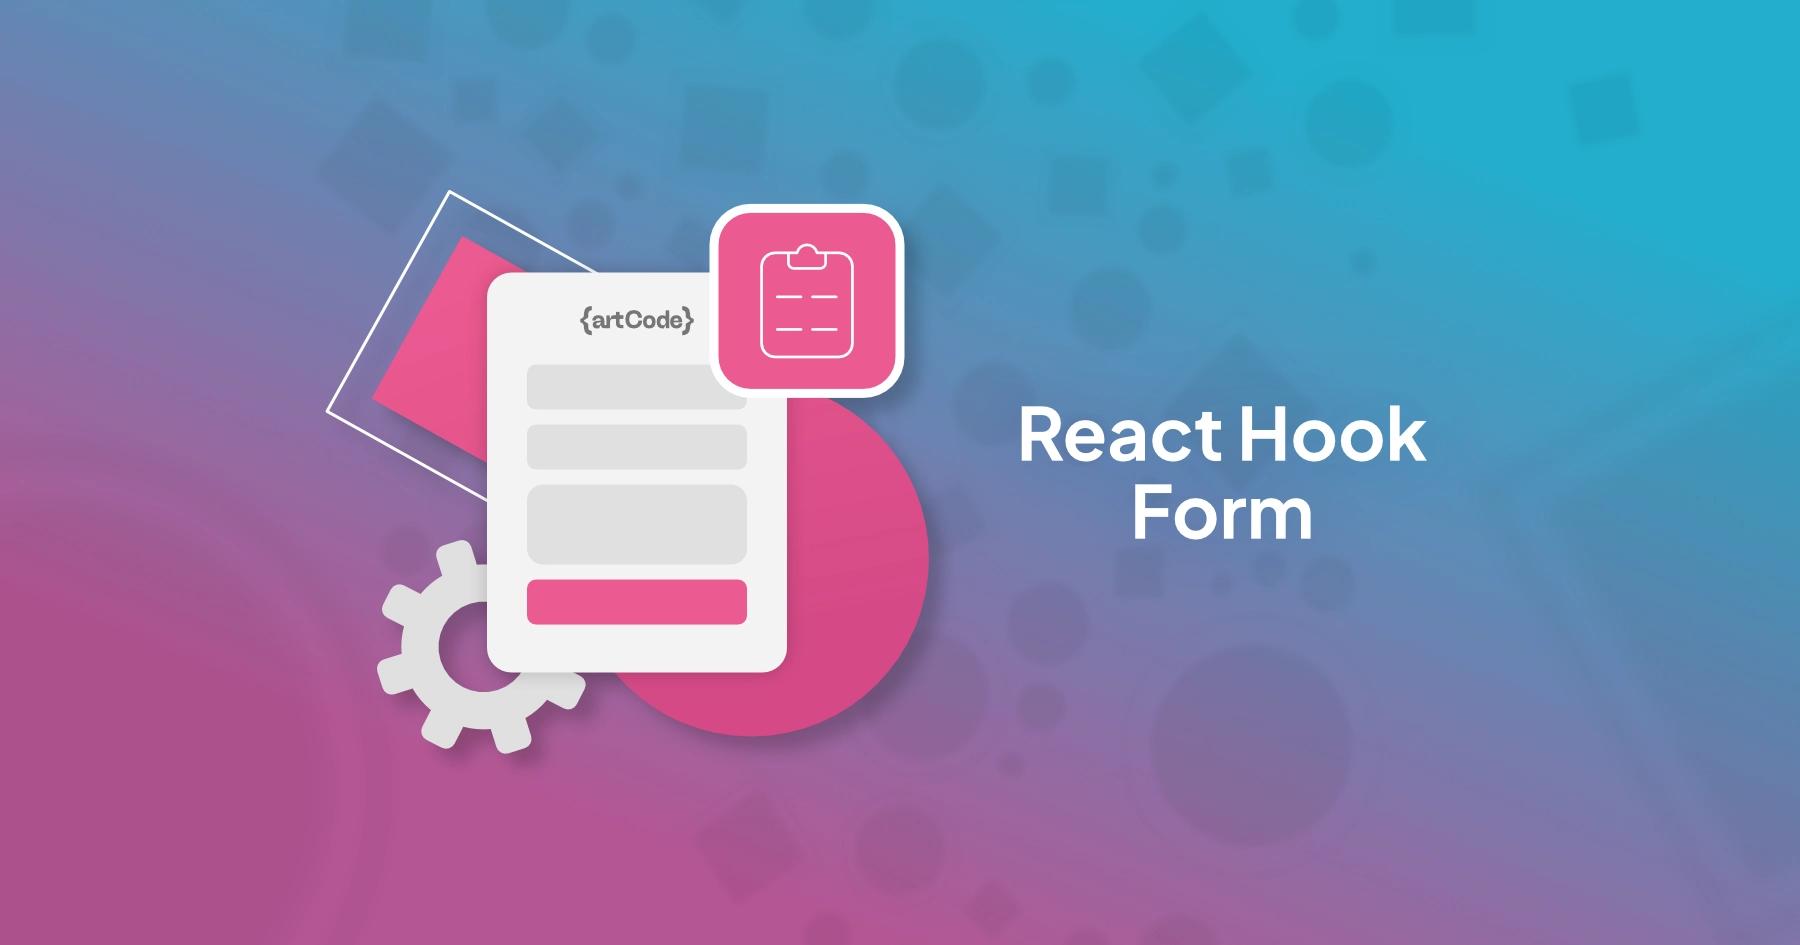 Form e validazione in React con React Hook Form